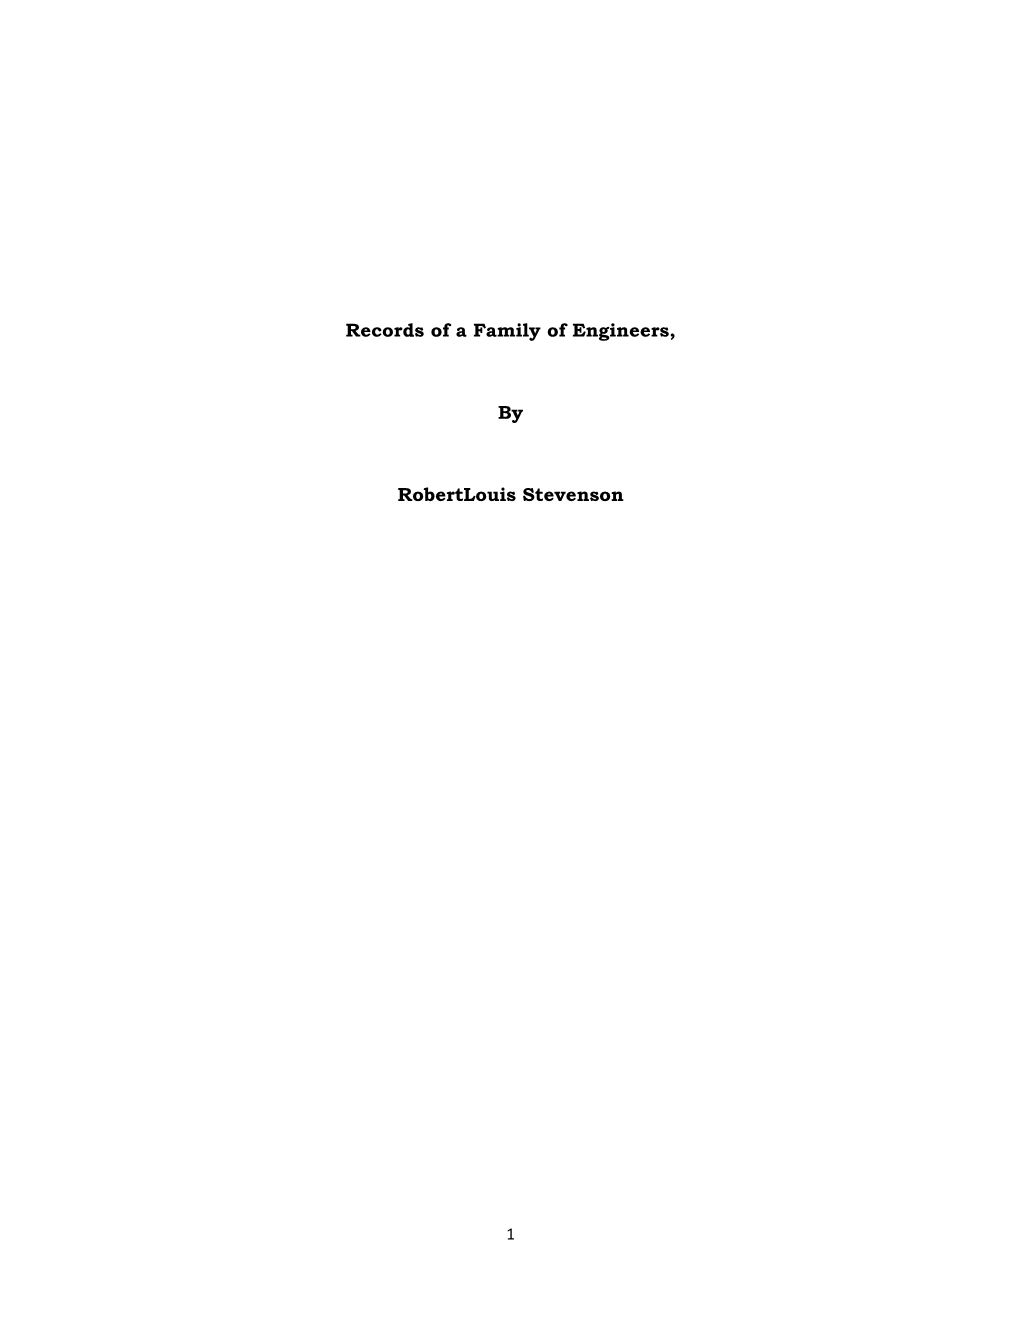 Records of a Family of Engineers, by Robertlouis Stevenson